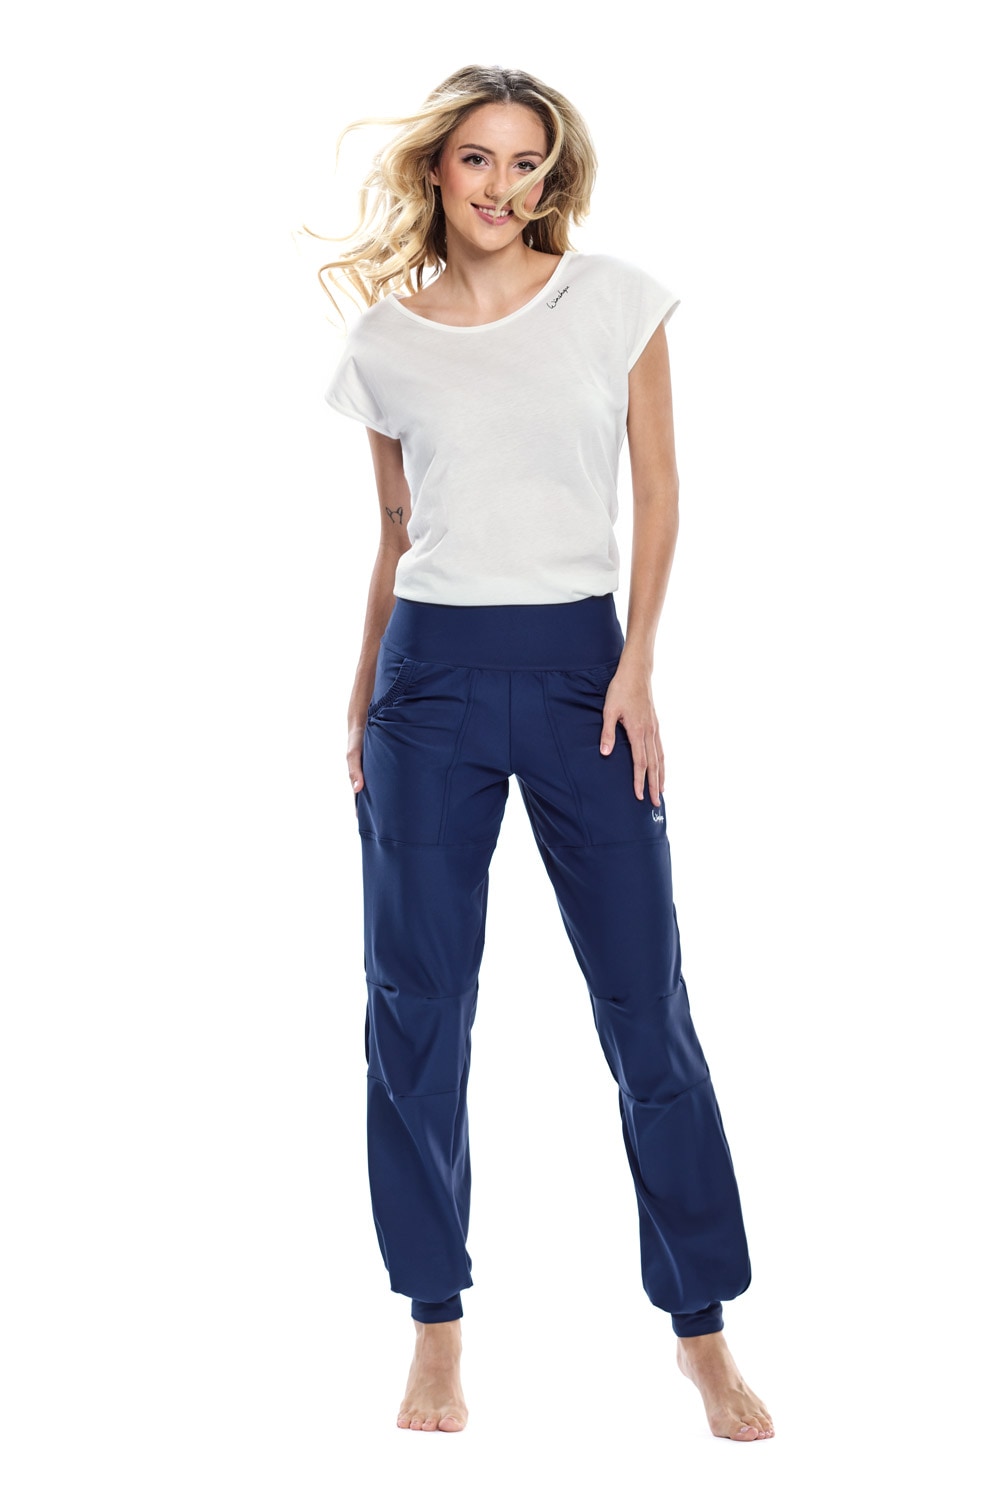 Winshape Sporthose »Functional Comfort Trousers OTTO online Waist LEI101C«, bei Leisure High Time